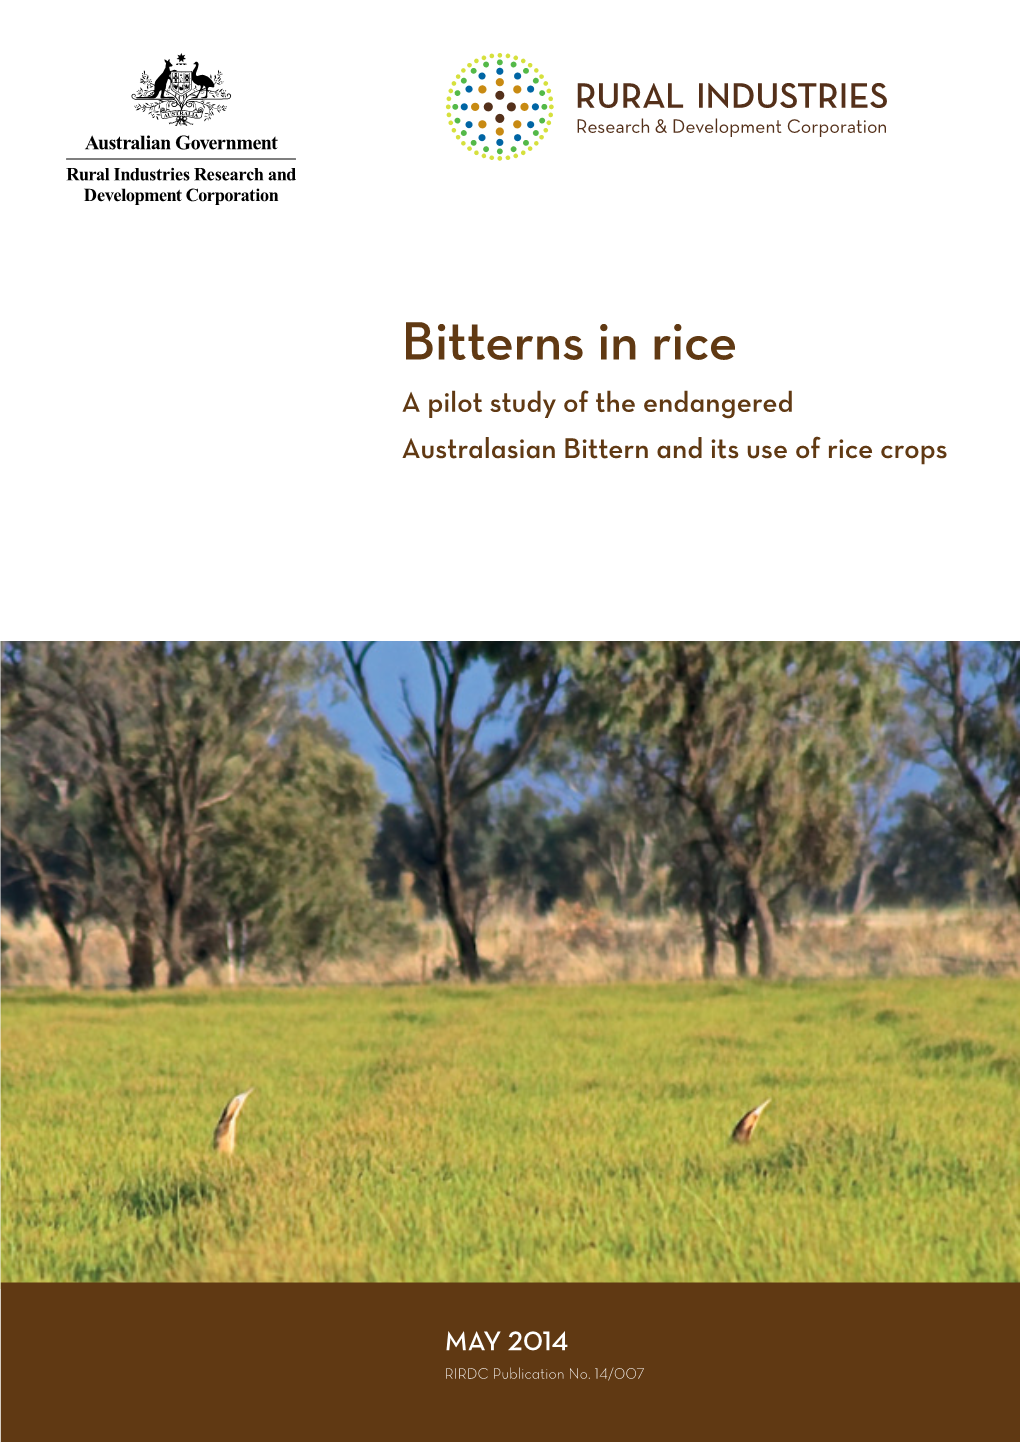 Bitterns in Rice a Pilot Study of the Endangered Australasian Bittern and Its Use of Rice Crops